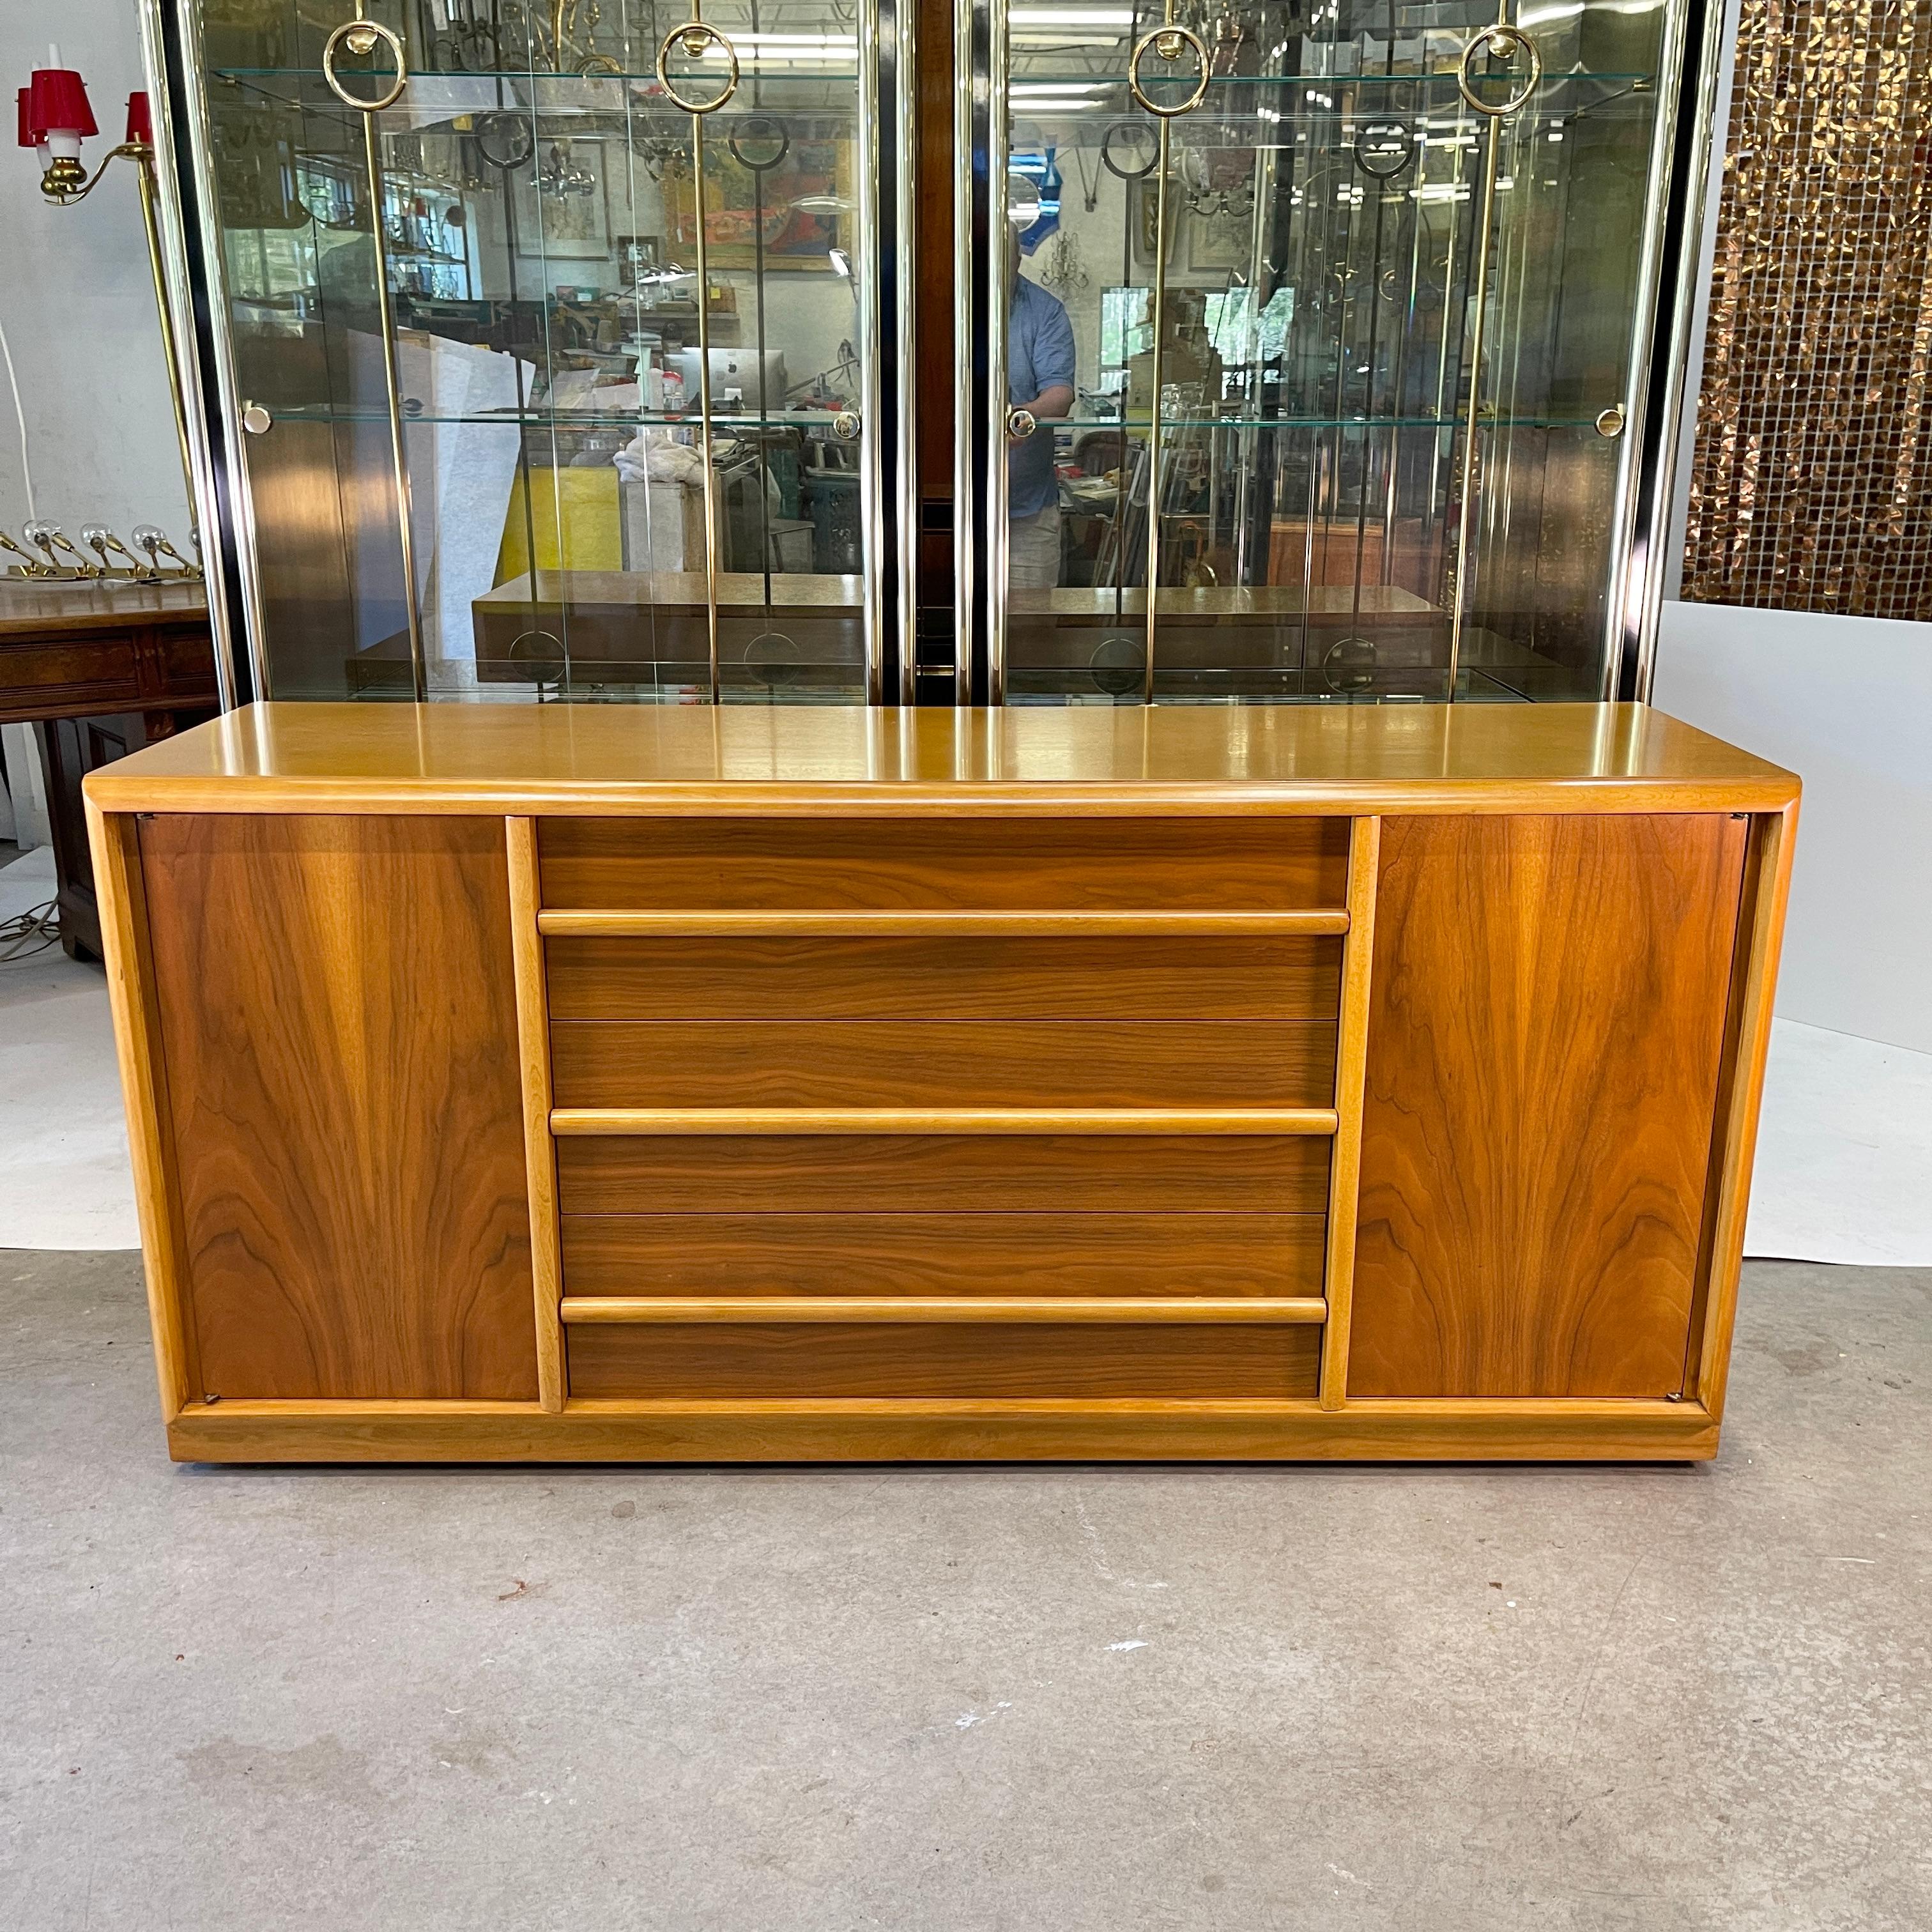 American classical modern buffet server cabinet designed by Robsjohn-Gibbings for Widdicomb Furniture Co. in figured walnut with contrasting maple moldings. Original label in top center drawer. Beautifully finished on all sides as well as inside.